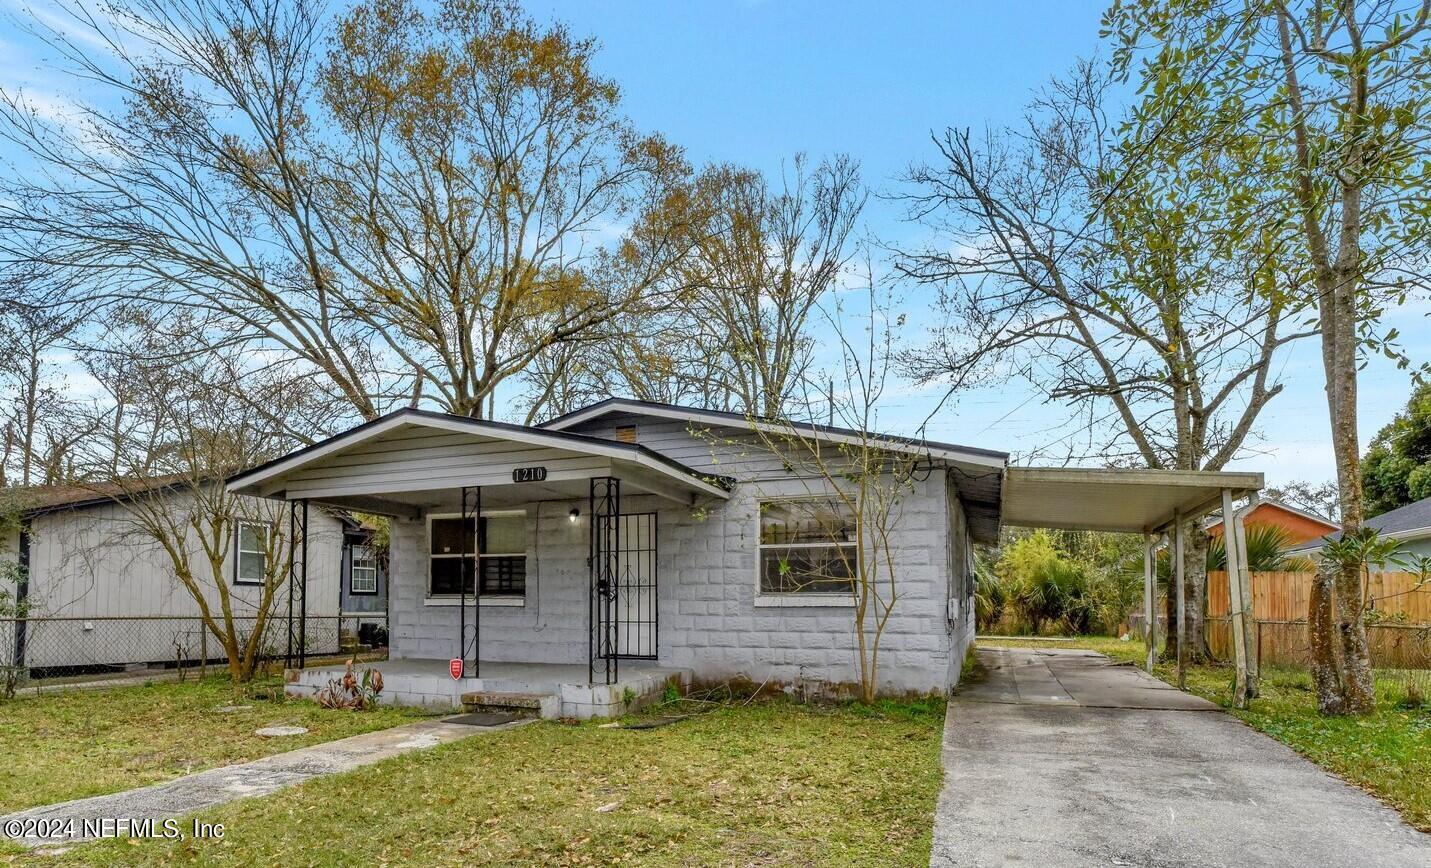 Jacksonville, FL home for sale located at 1210 27th Street, Jacksonville, FL 32209